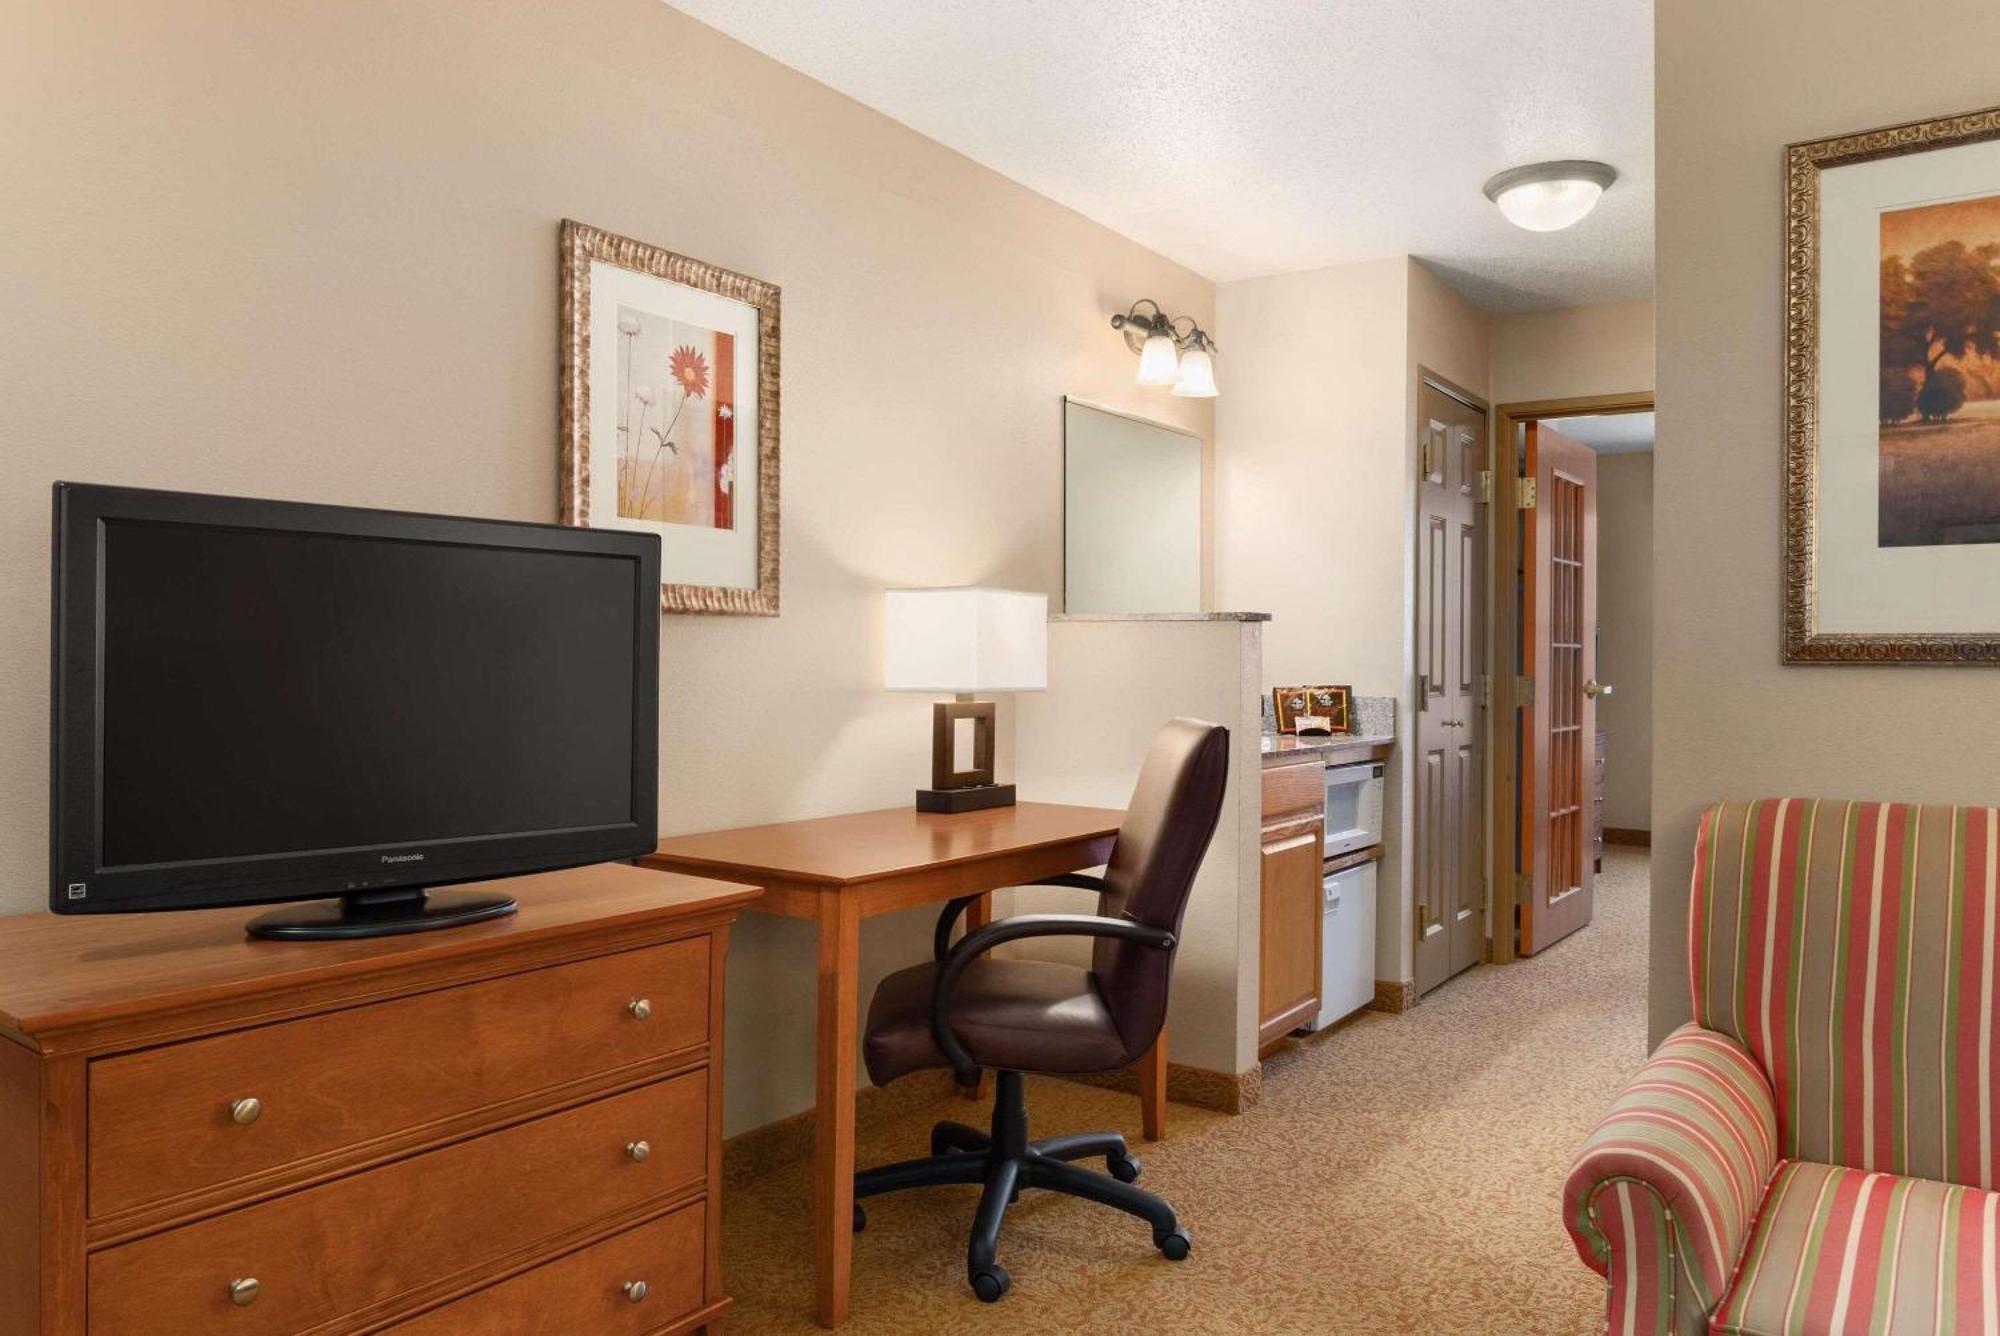 Country Inn & Suites By Radisson, Sycamore, Il Bagian luar foto